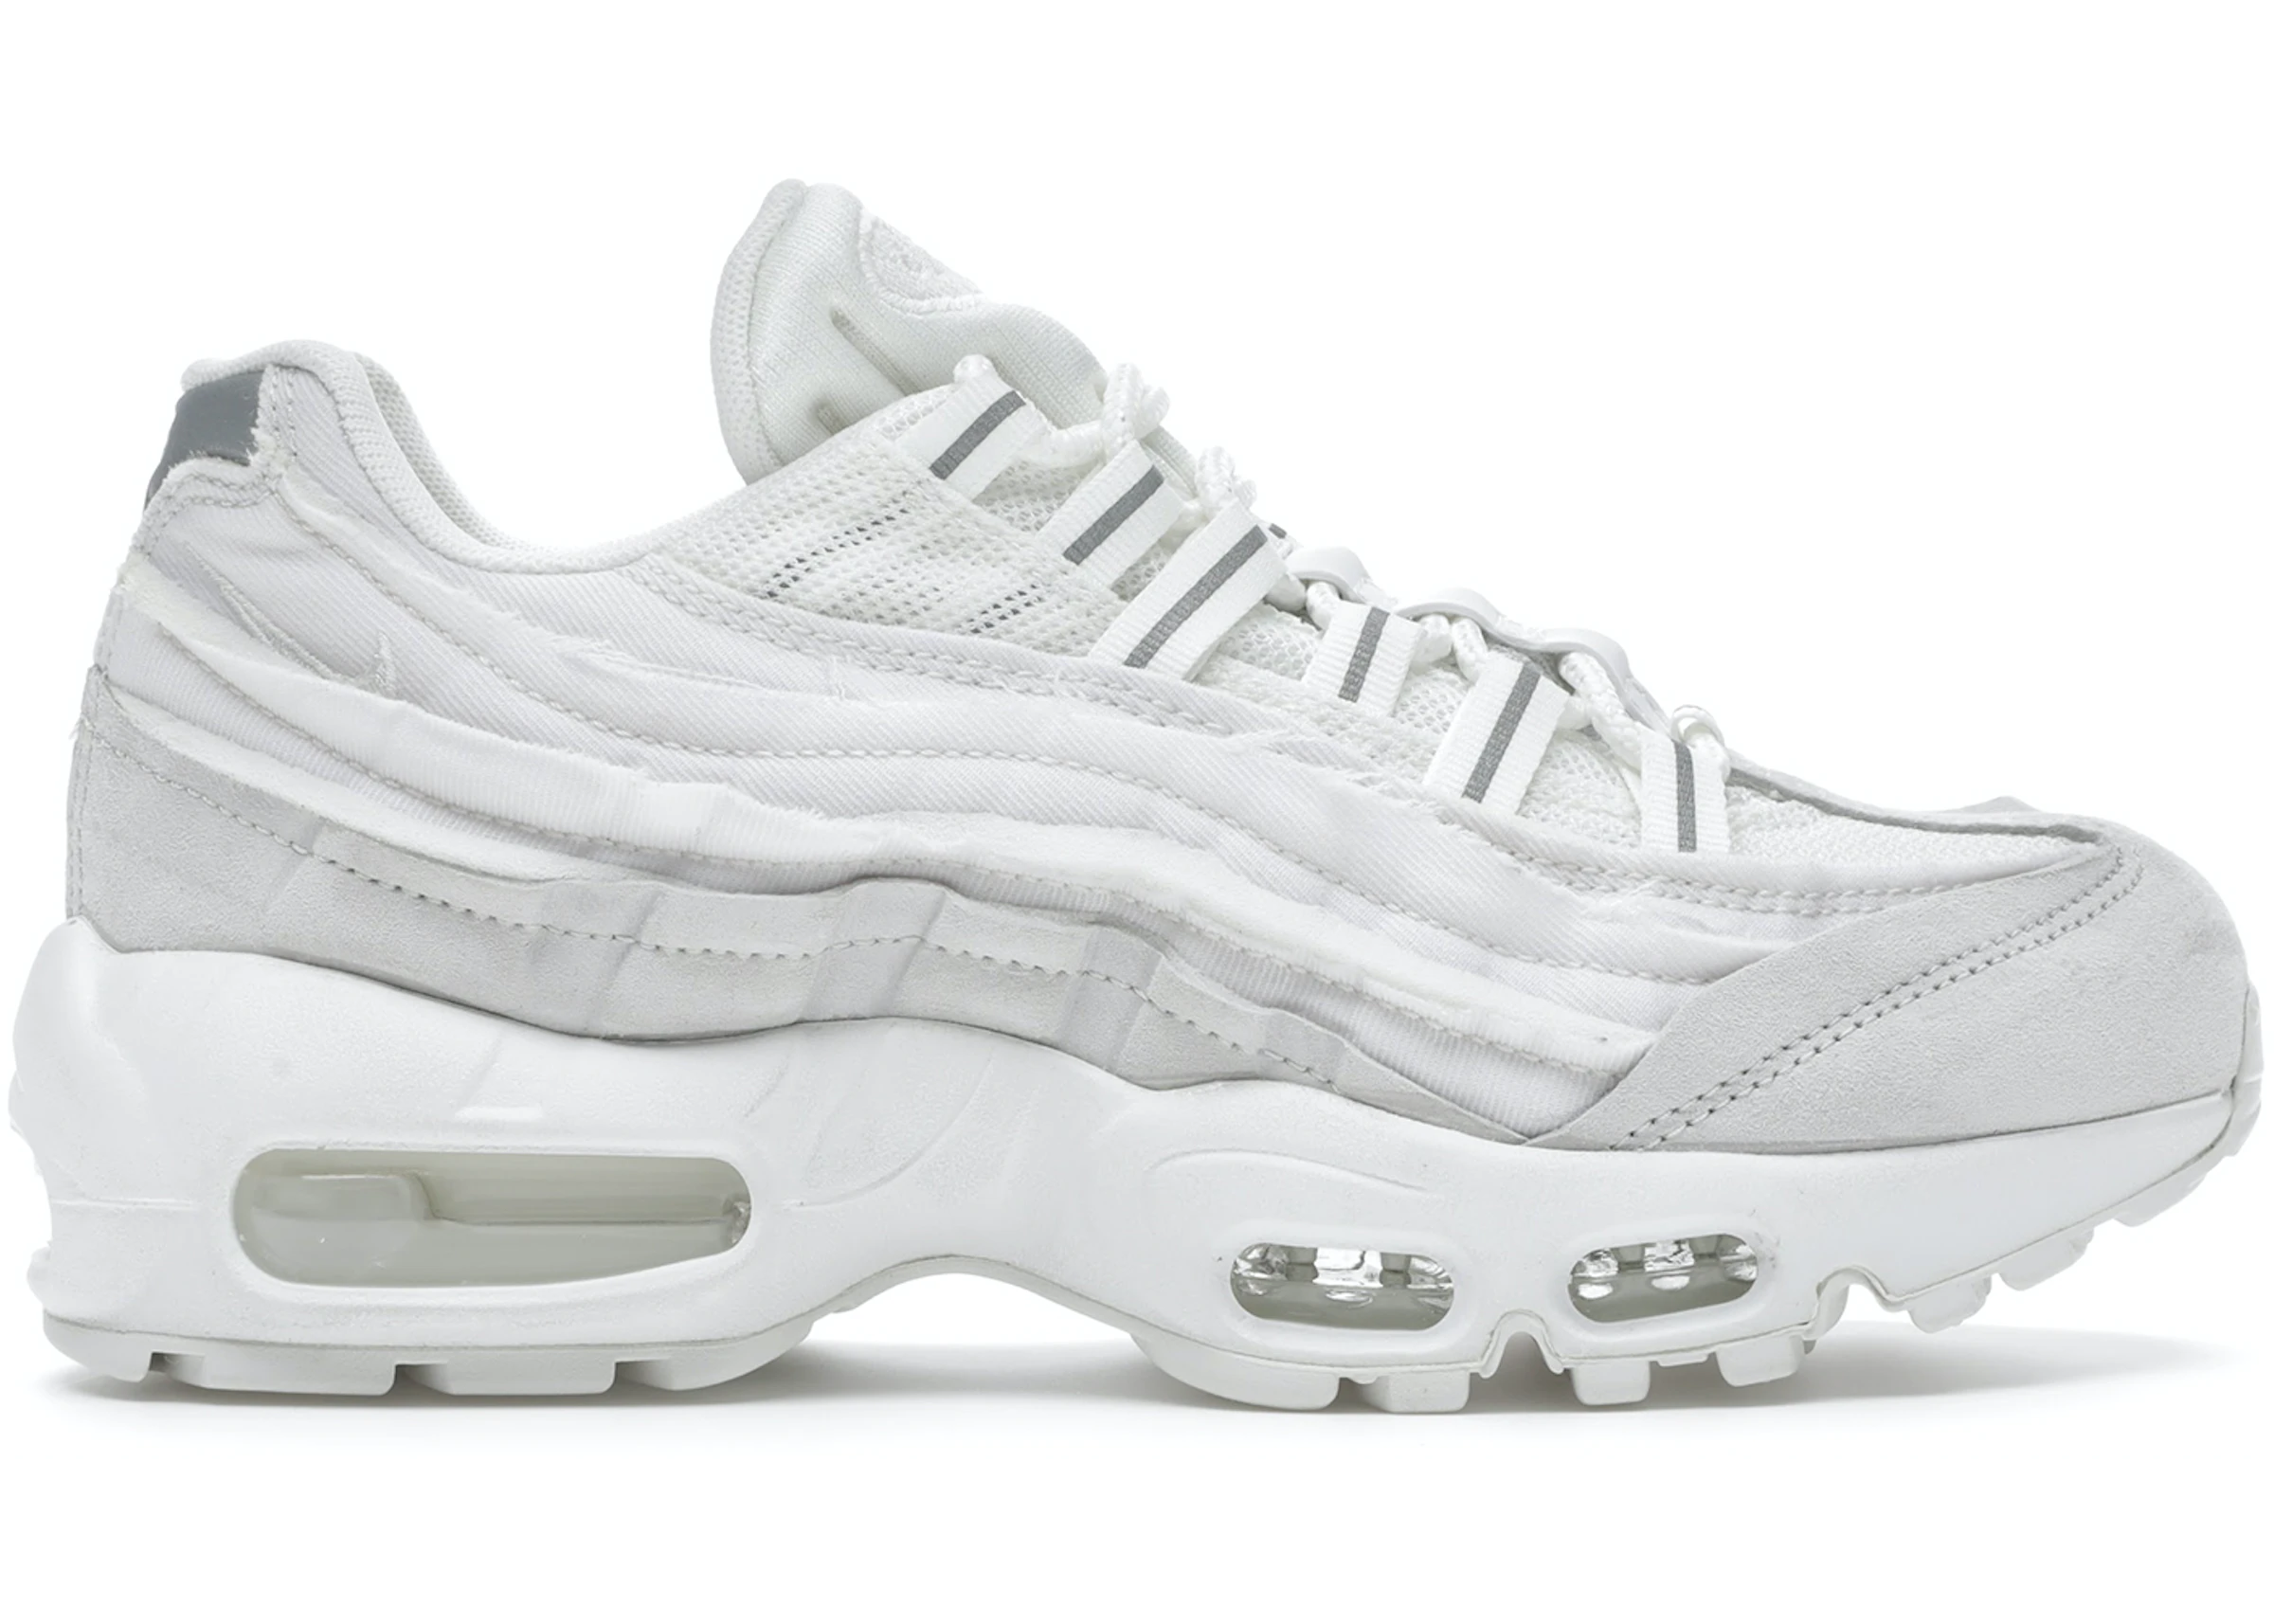 Become tent To interact Nike Air Max 95 Comme des Garcons White - CU8406-100 - US